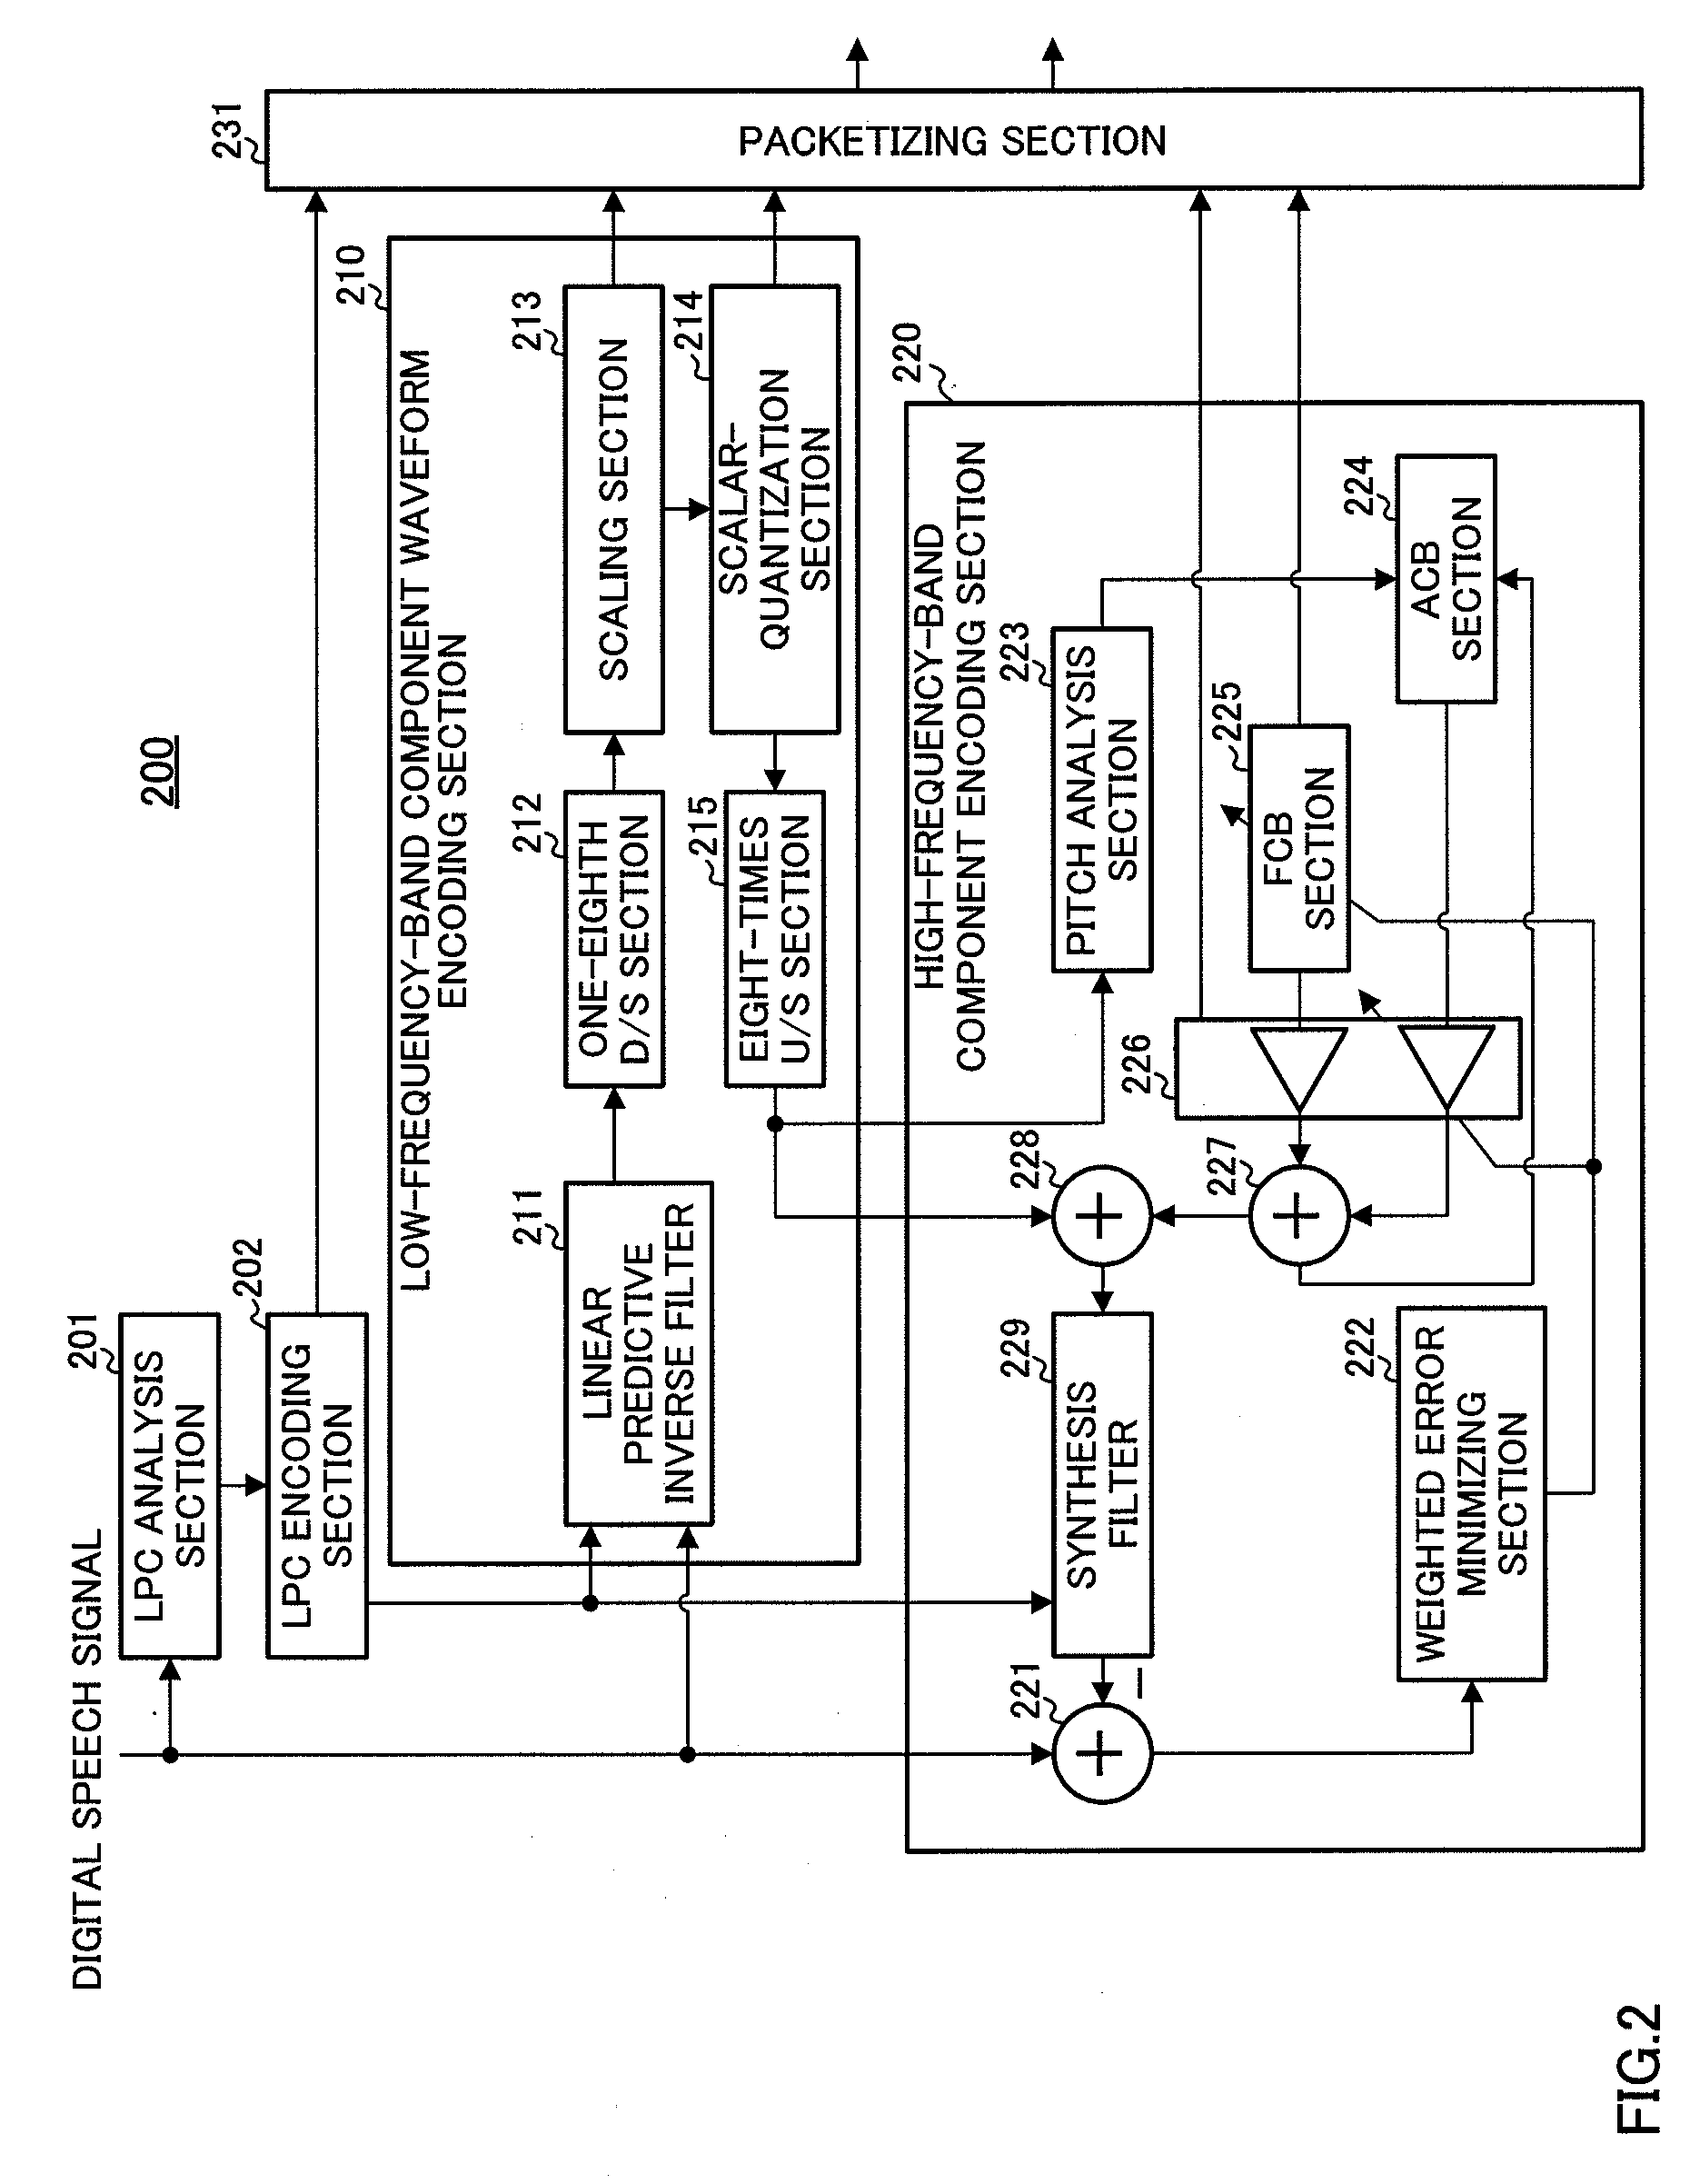 Low-frequency-band component and high-frequency-band audio encoding/decoding apparatus, and communication apparatus thereof